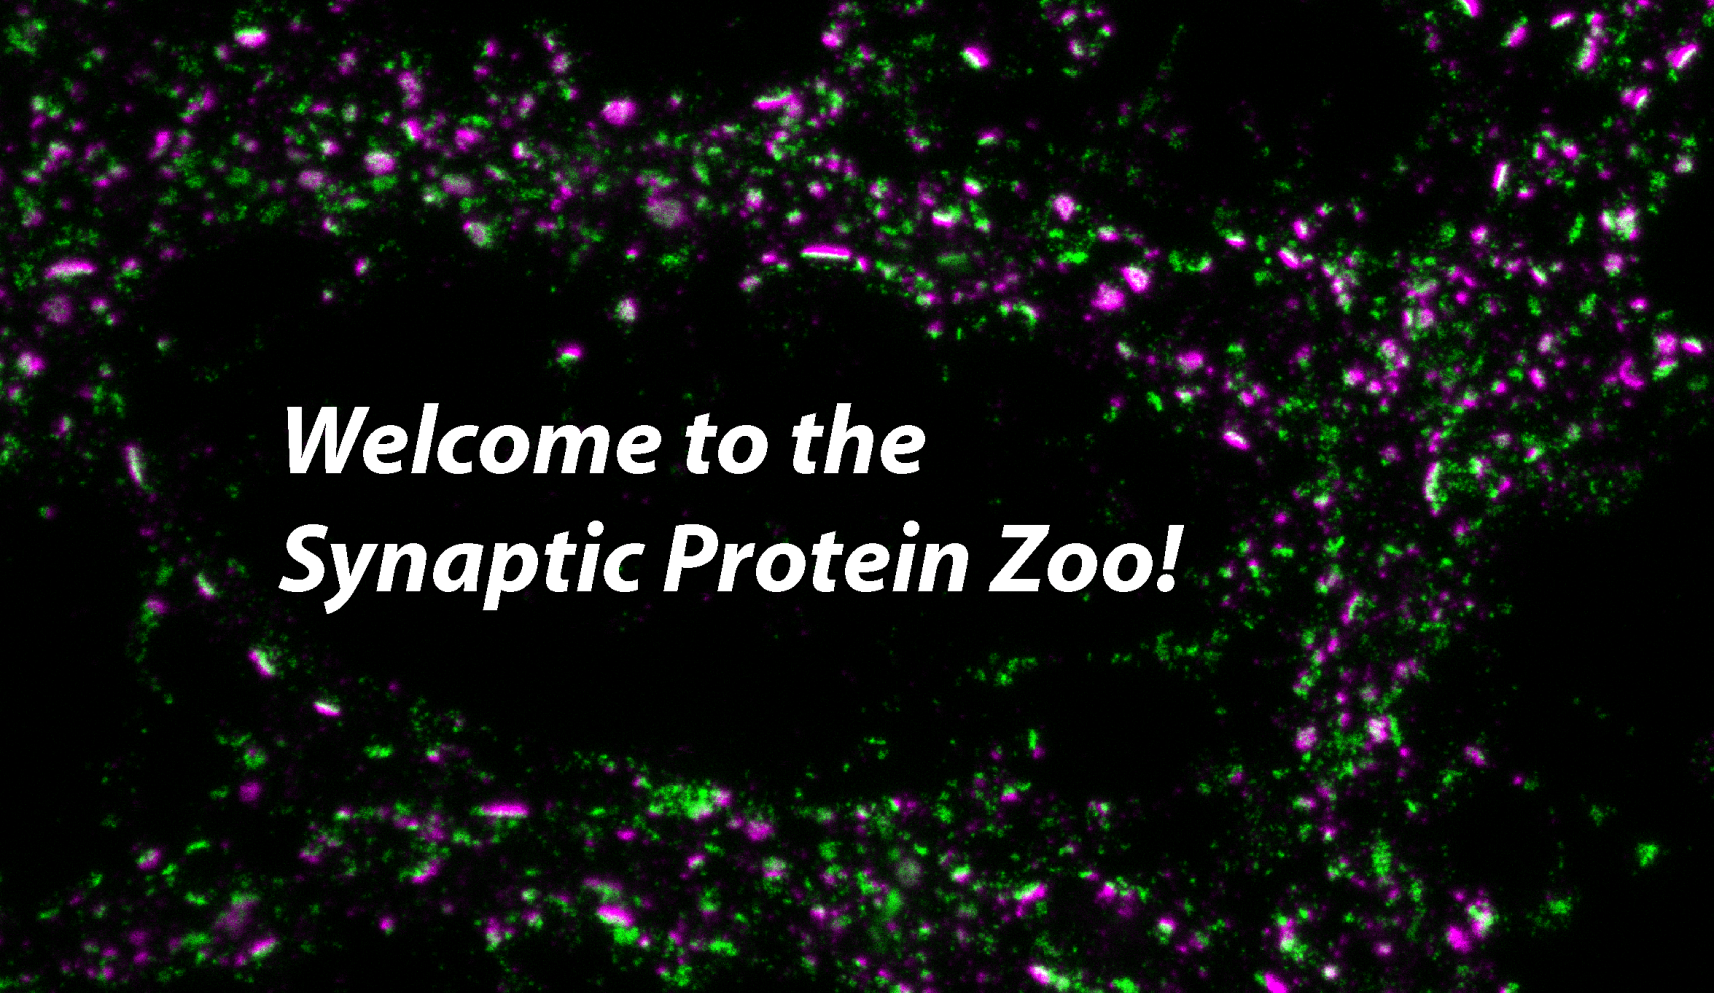 Welcome to the Synaptic Protein Zoo!